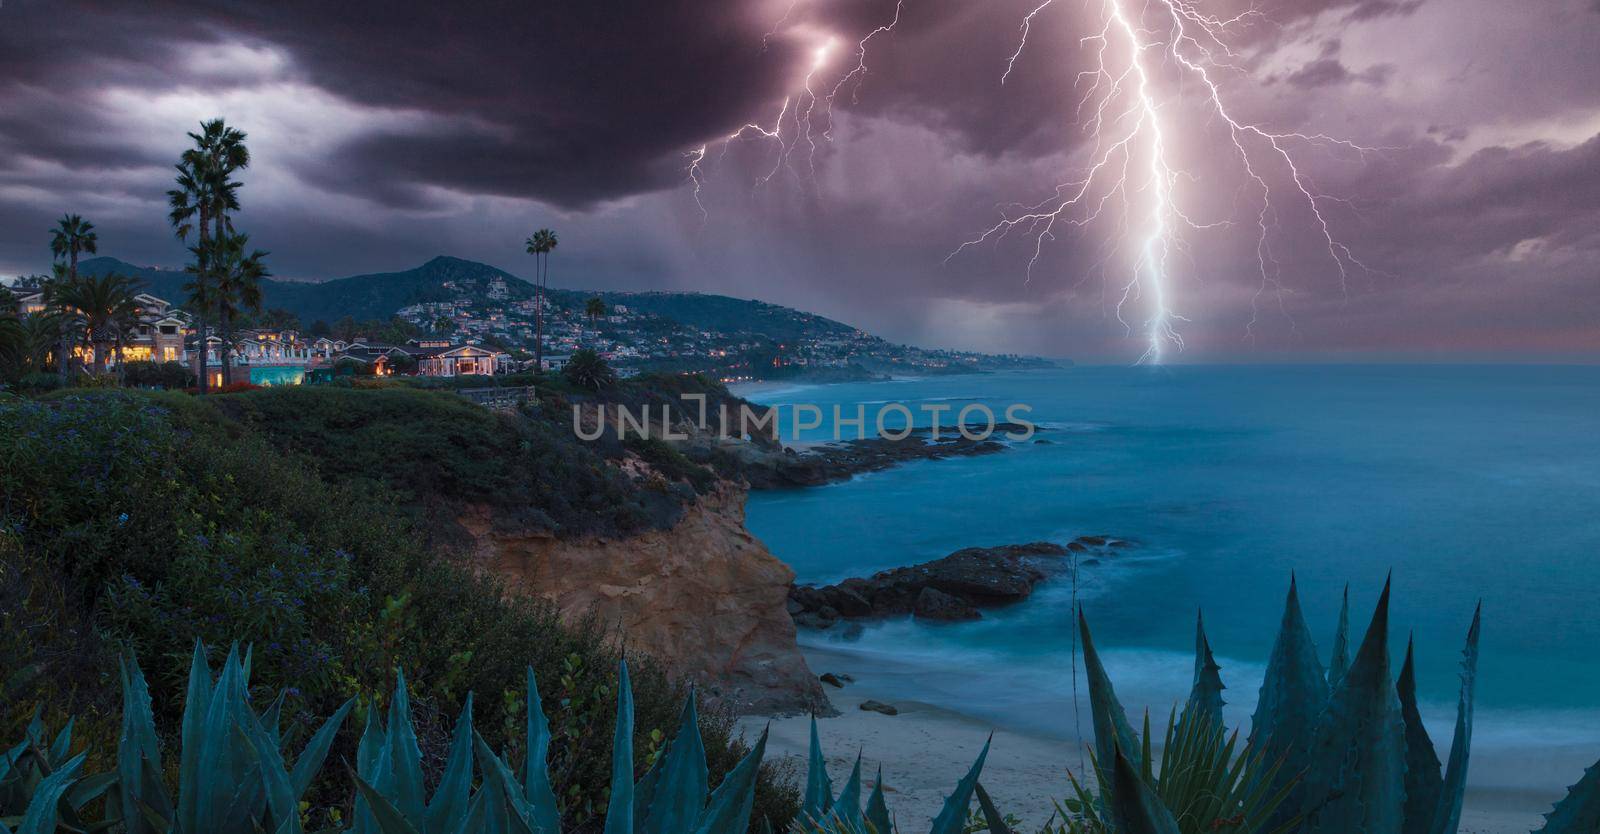 Lightning flashes over a cliff overlooking the ocean in Laguna Beach, California at sunrise.